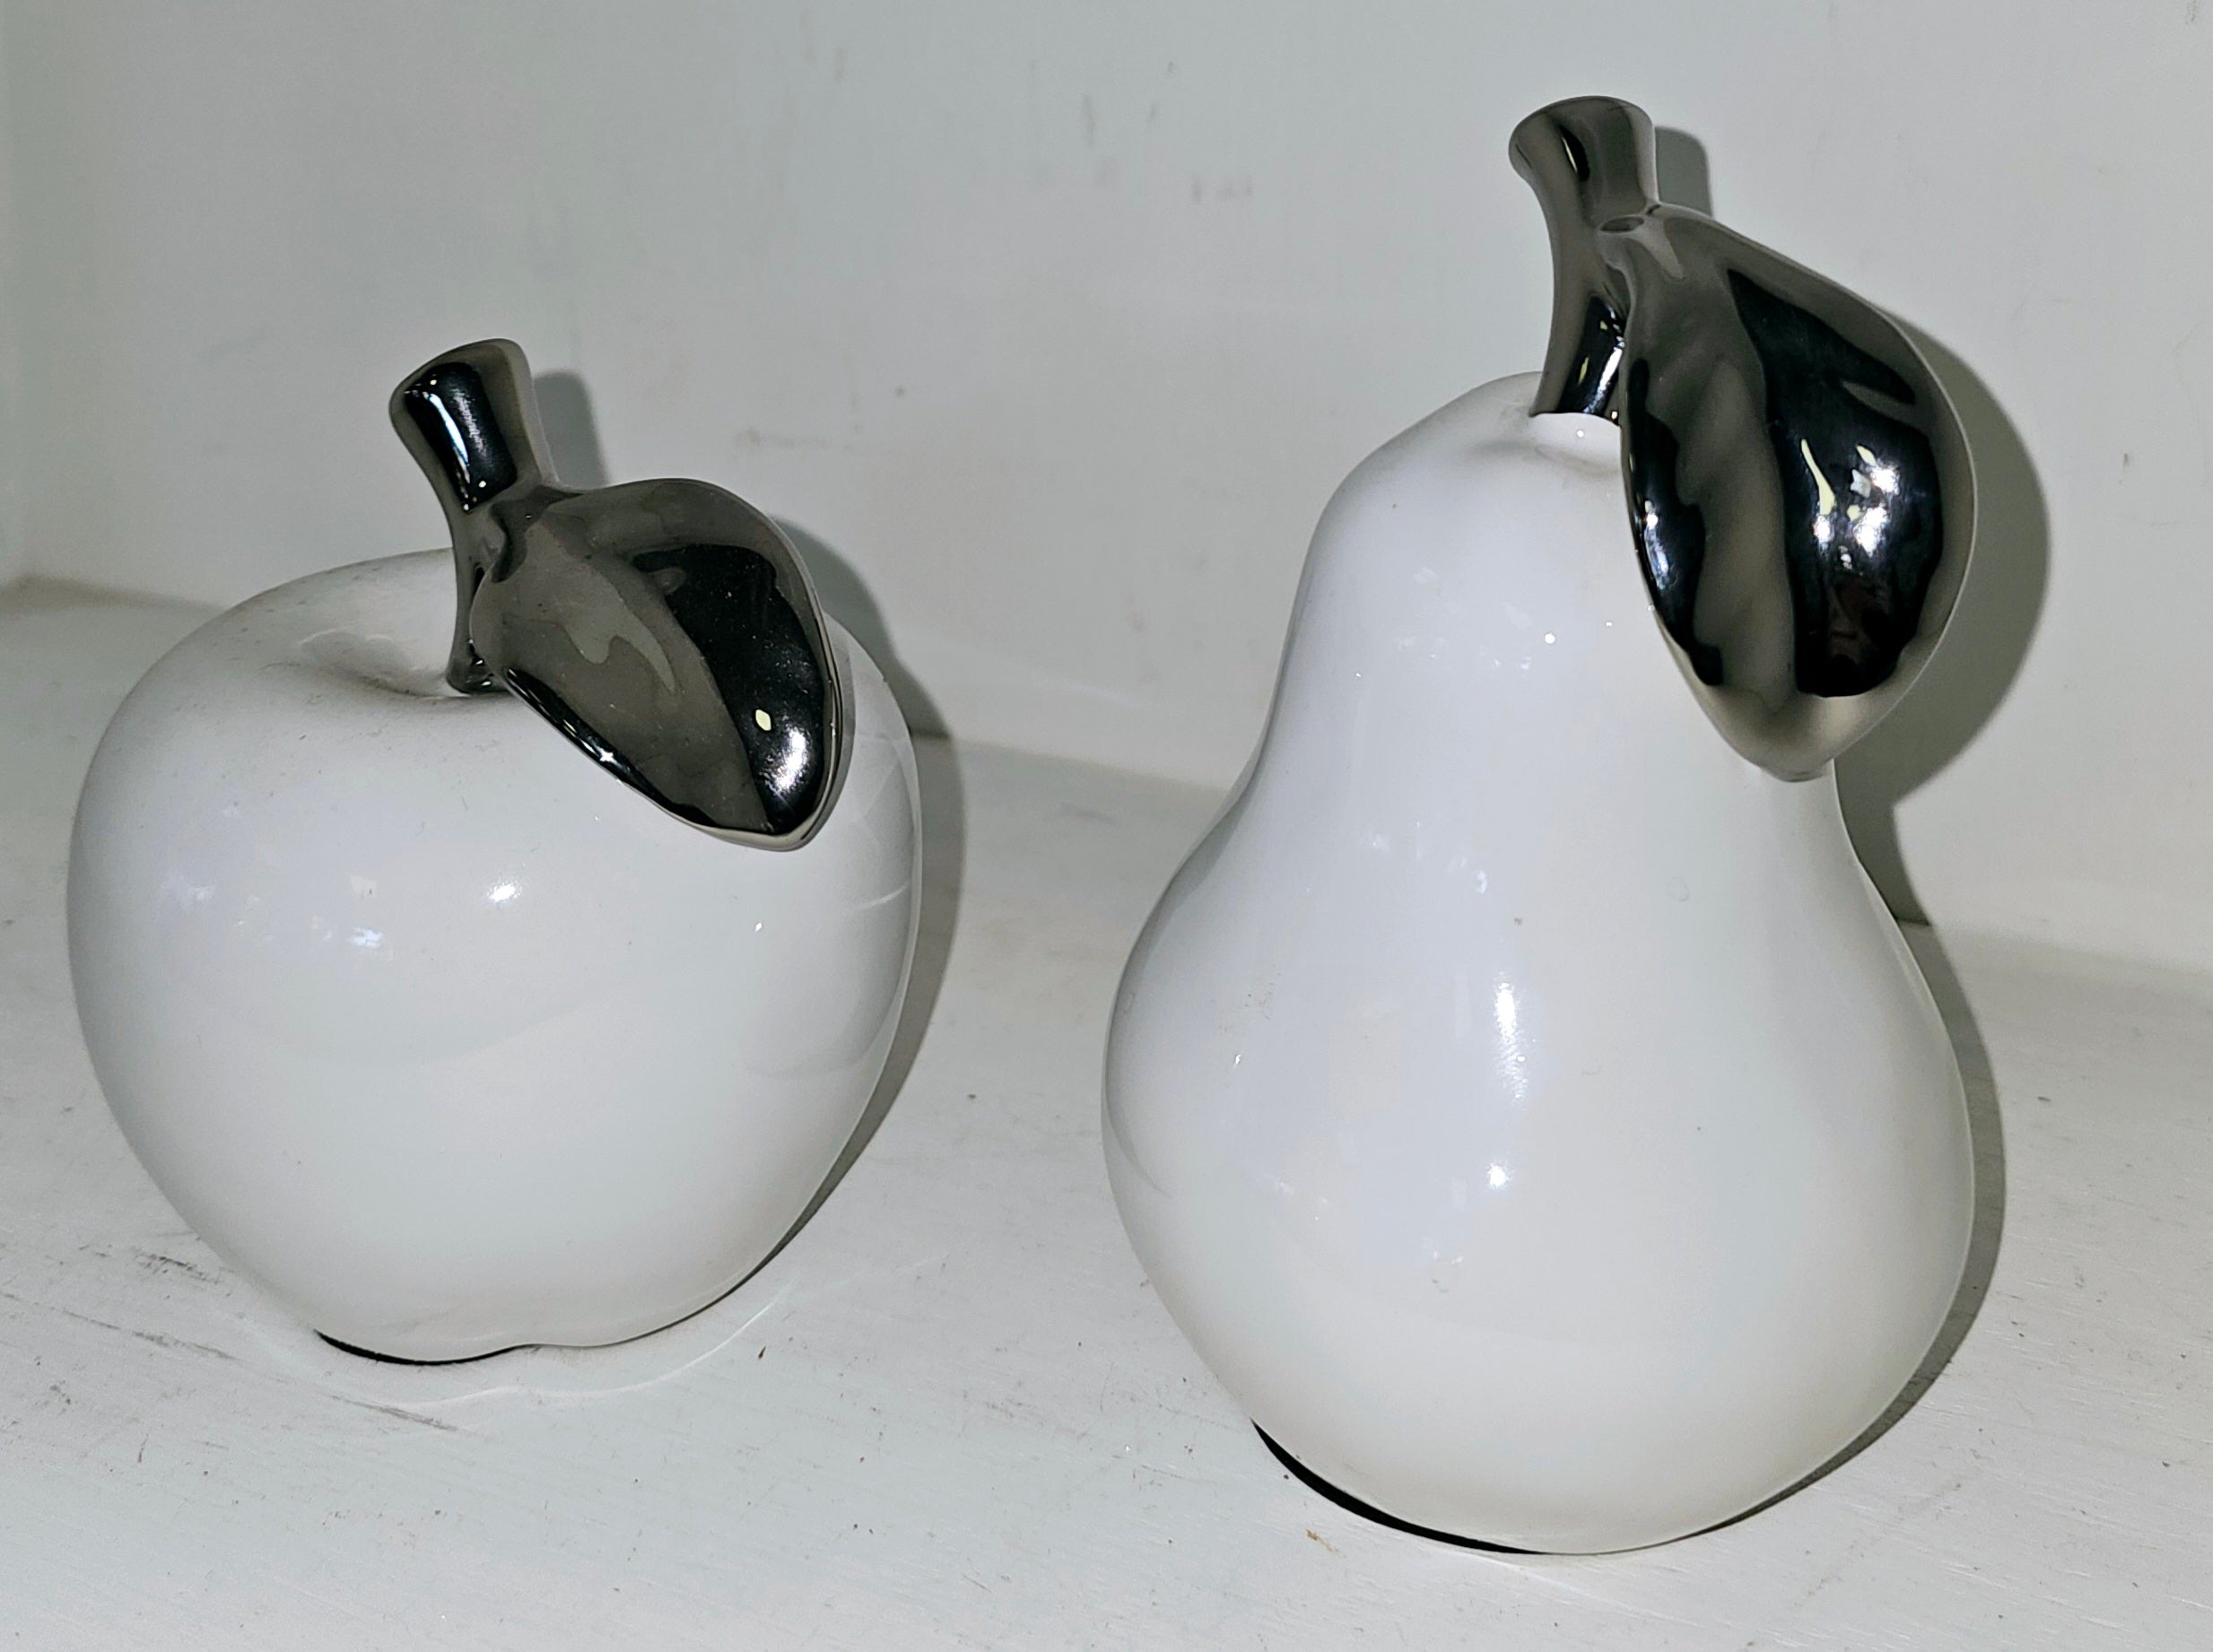 Orchard White Ceramic Silver Tipped Pear & Apple Decor Sculpture